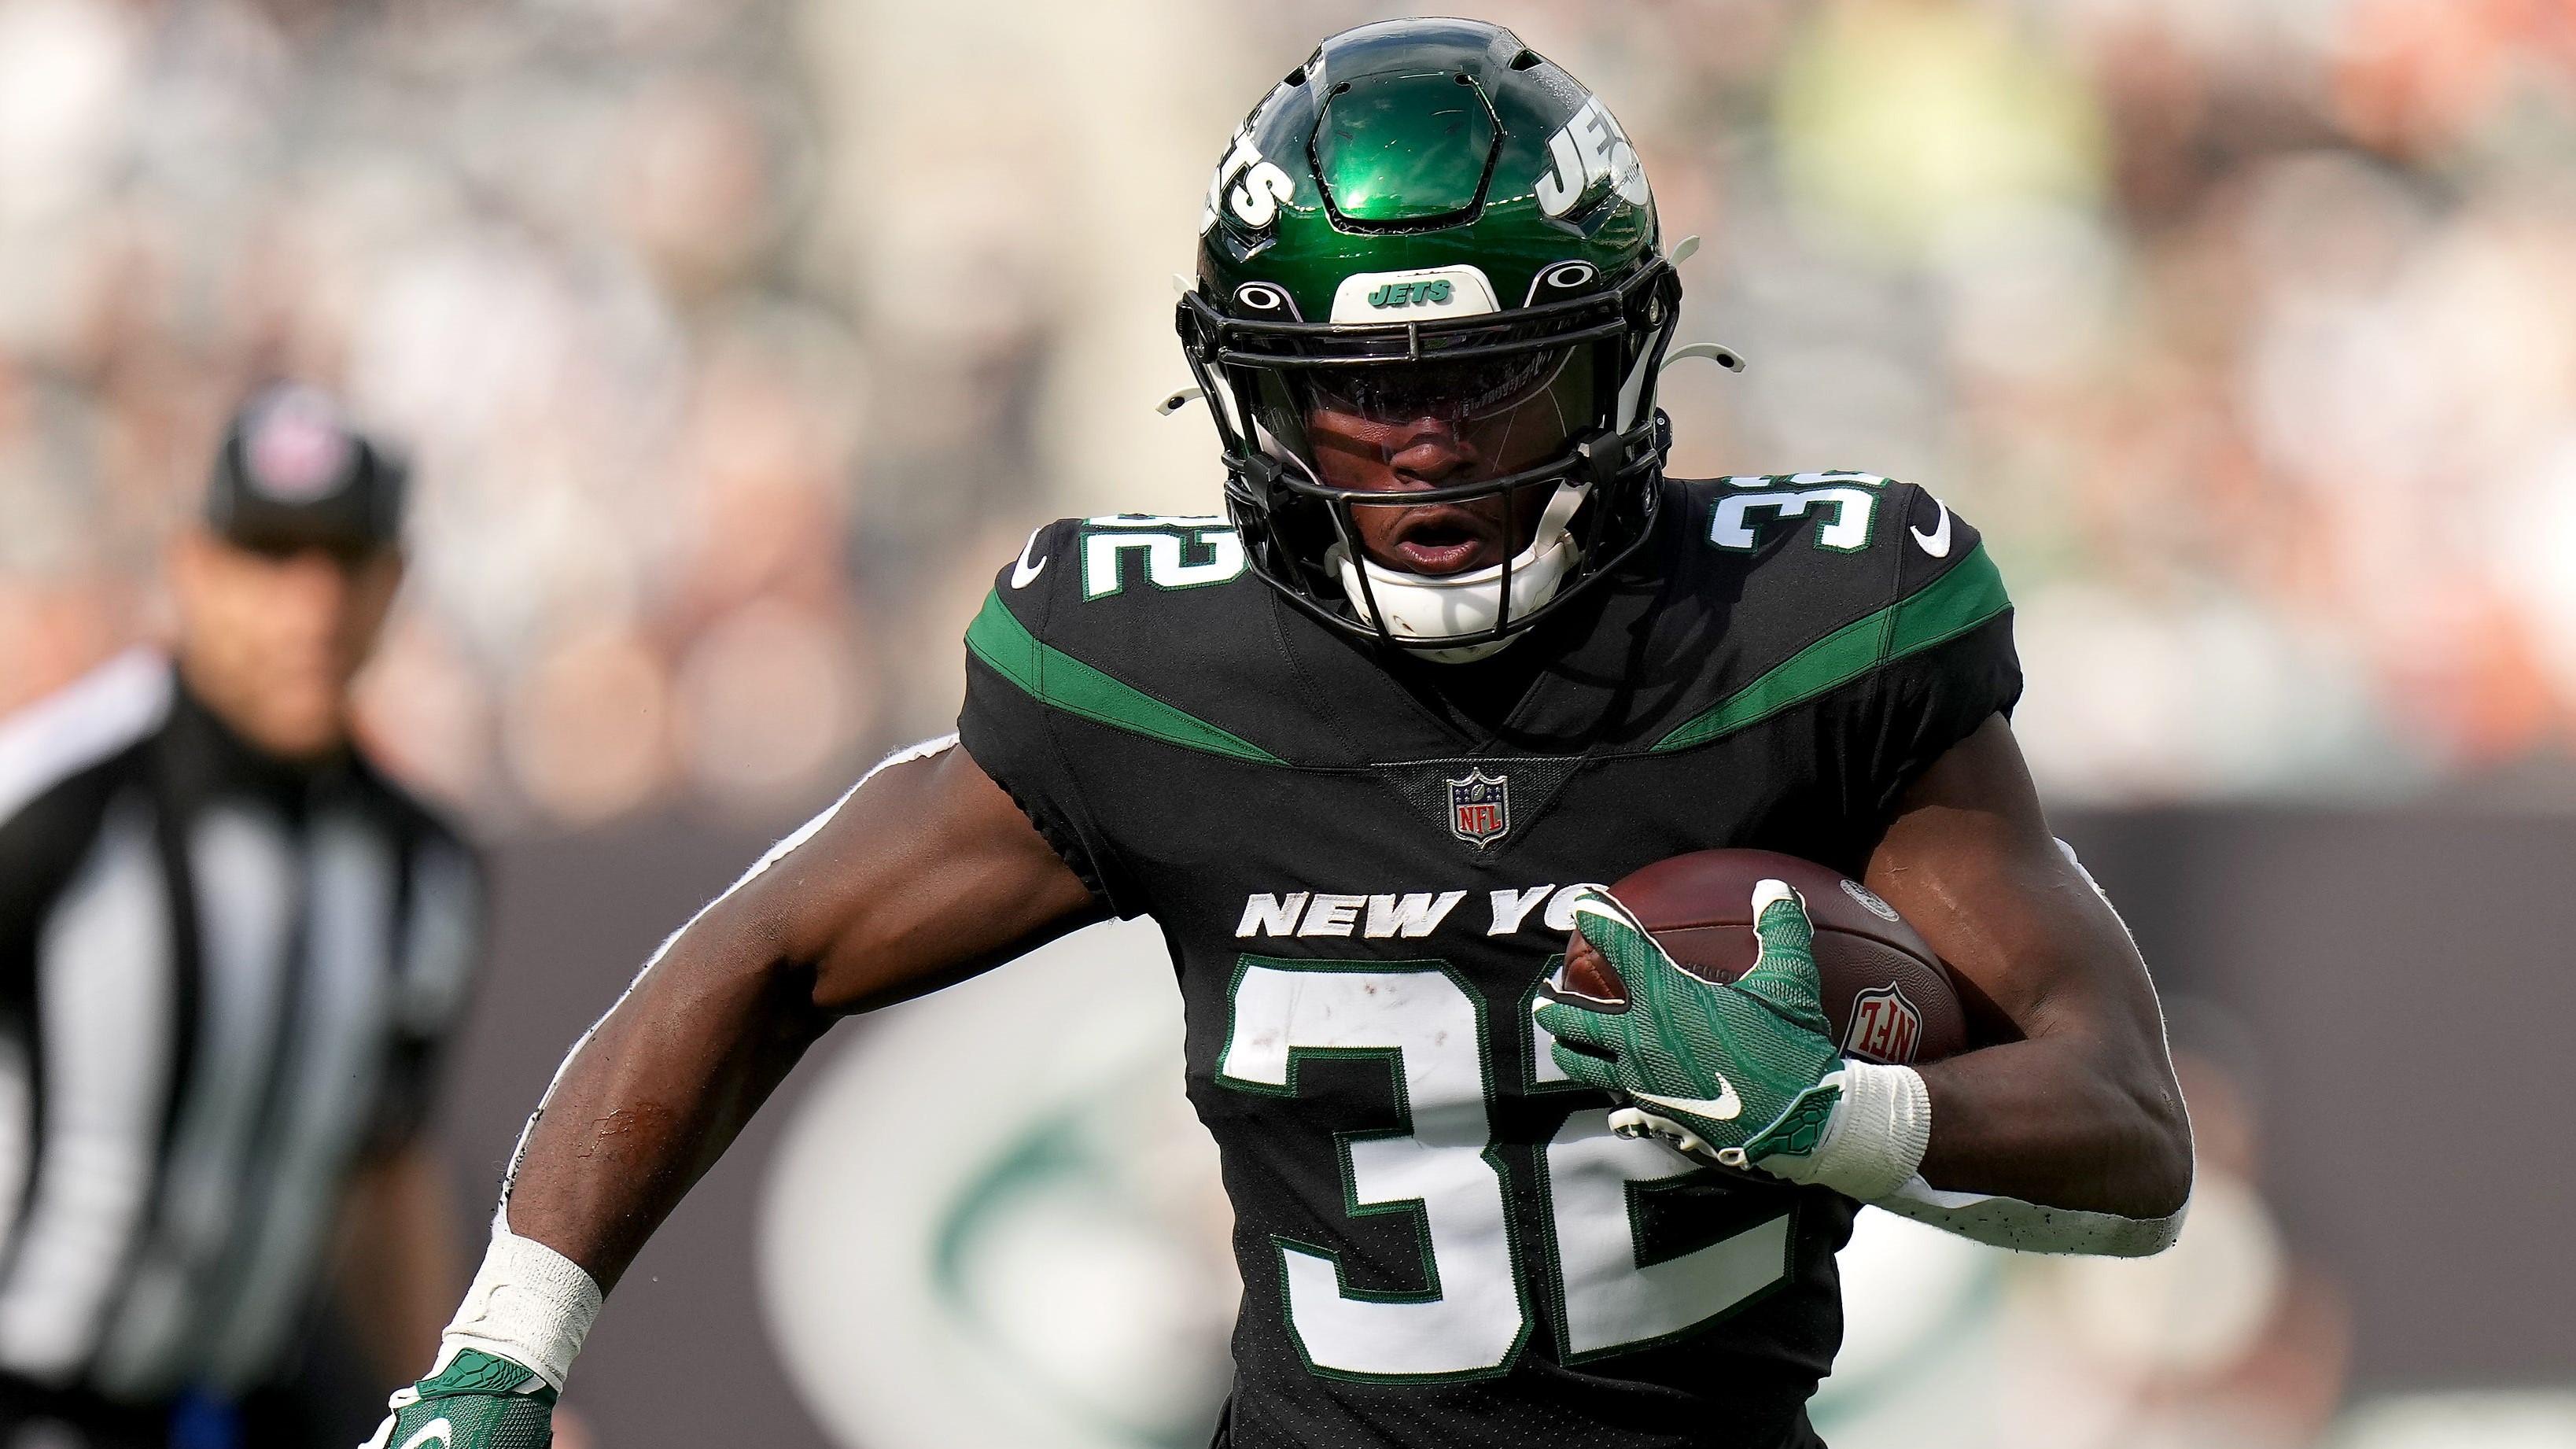 New York Jets running back Michael Carter (32) carries the ball on a touchdown run in the first quarter during a Week 8 NFL football game against the Cincinnati Bengals, Sunday, Oct. 31, 2021, at MetLife Stadium in East Rutherford, N.J. Cincinnati Bengals At New York Jets Oct 31 / Kareem Elgazzar / USA TODAY NETWORK